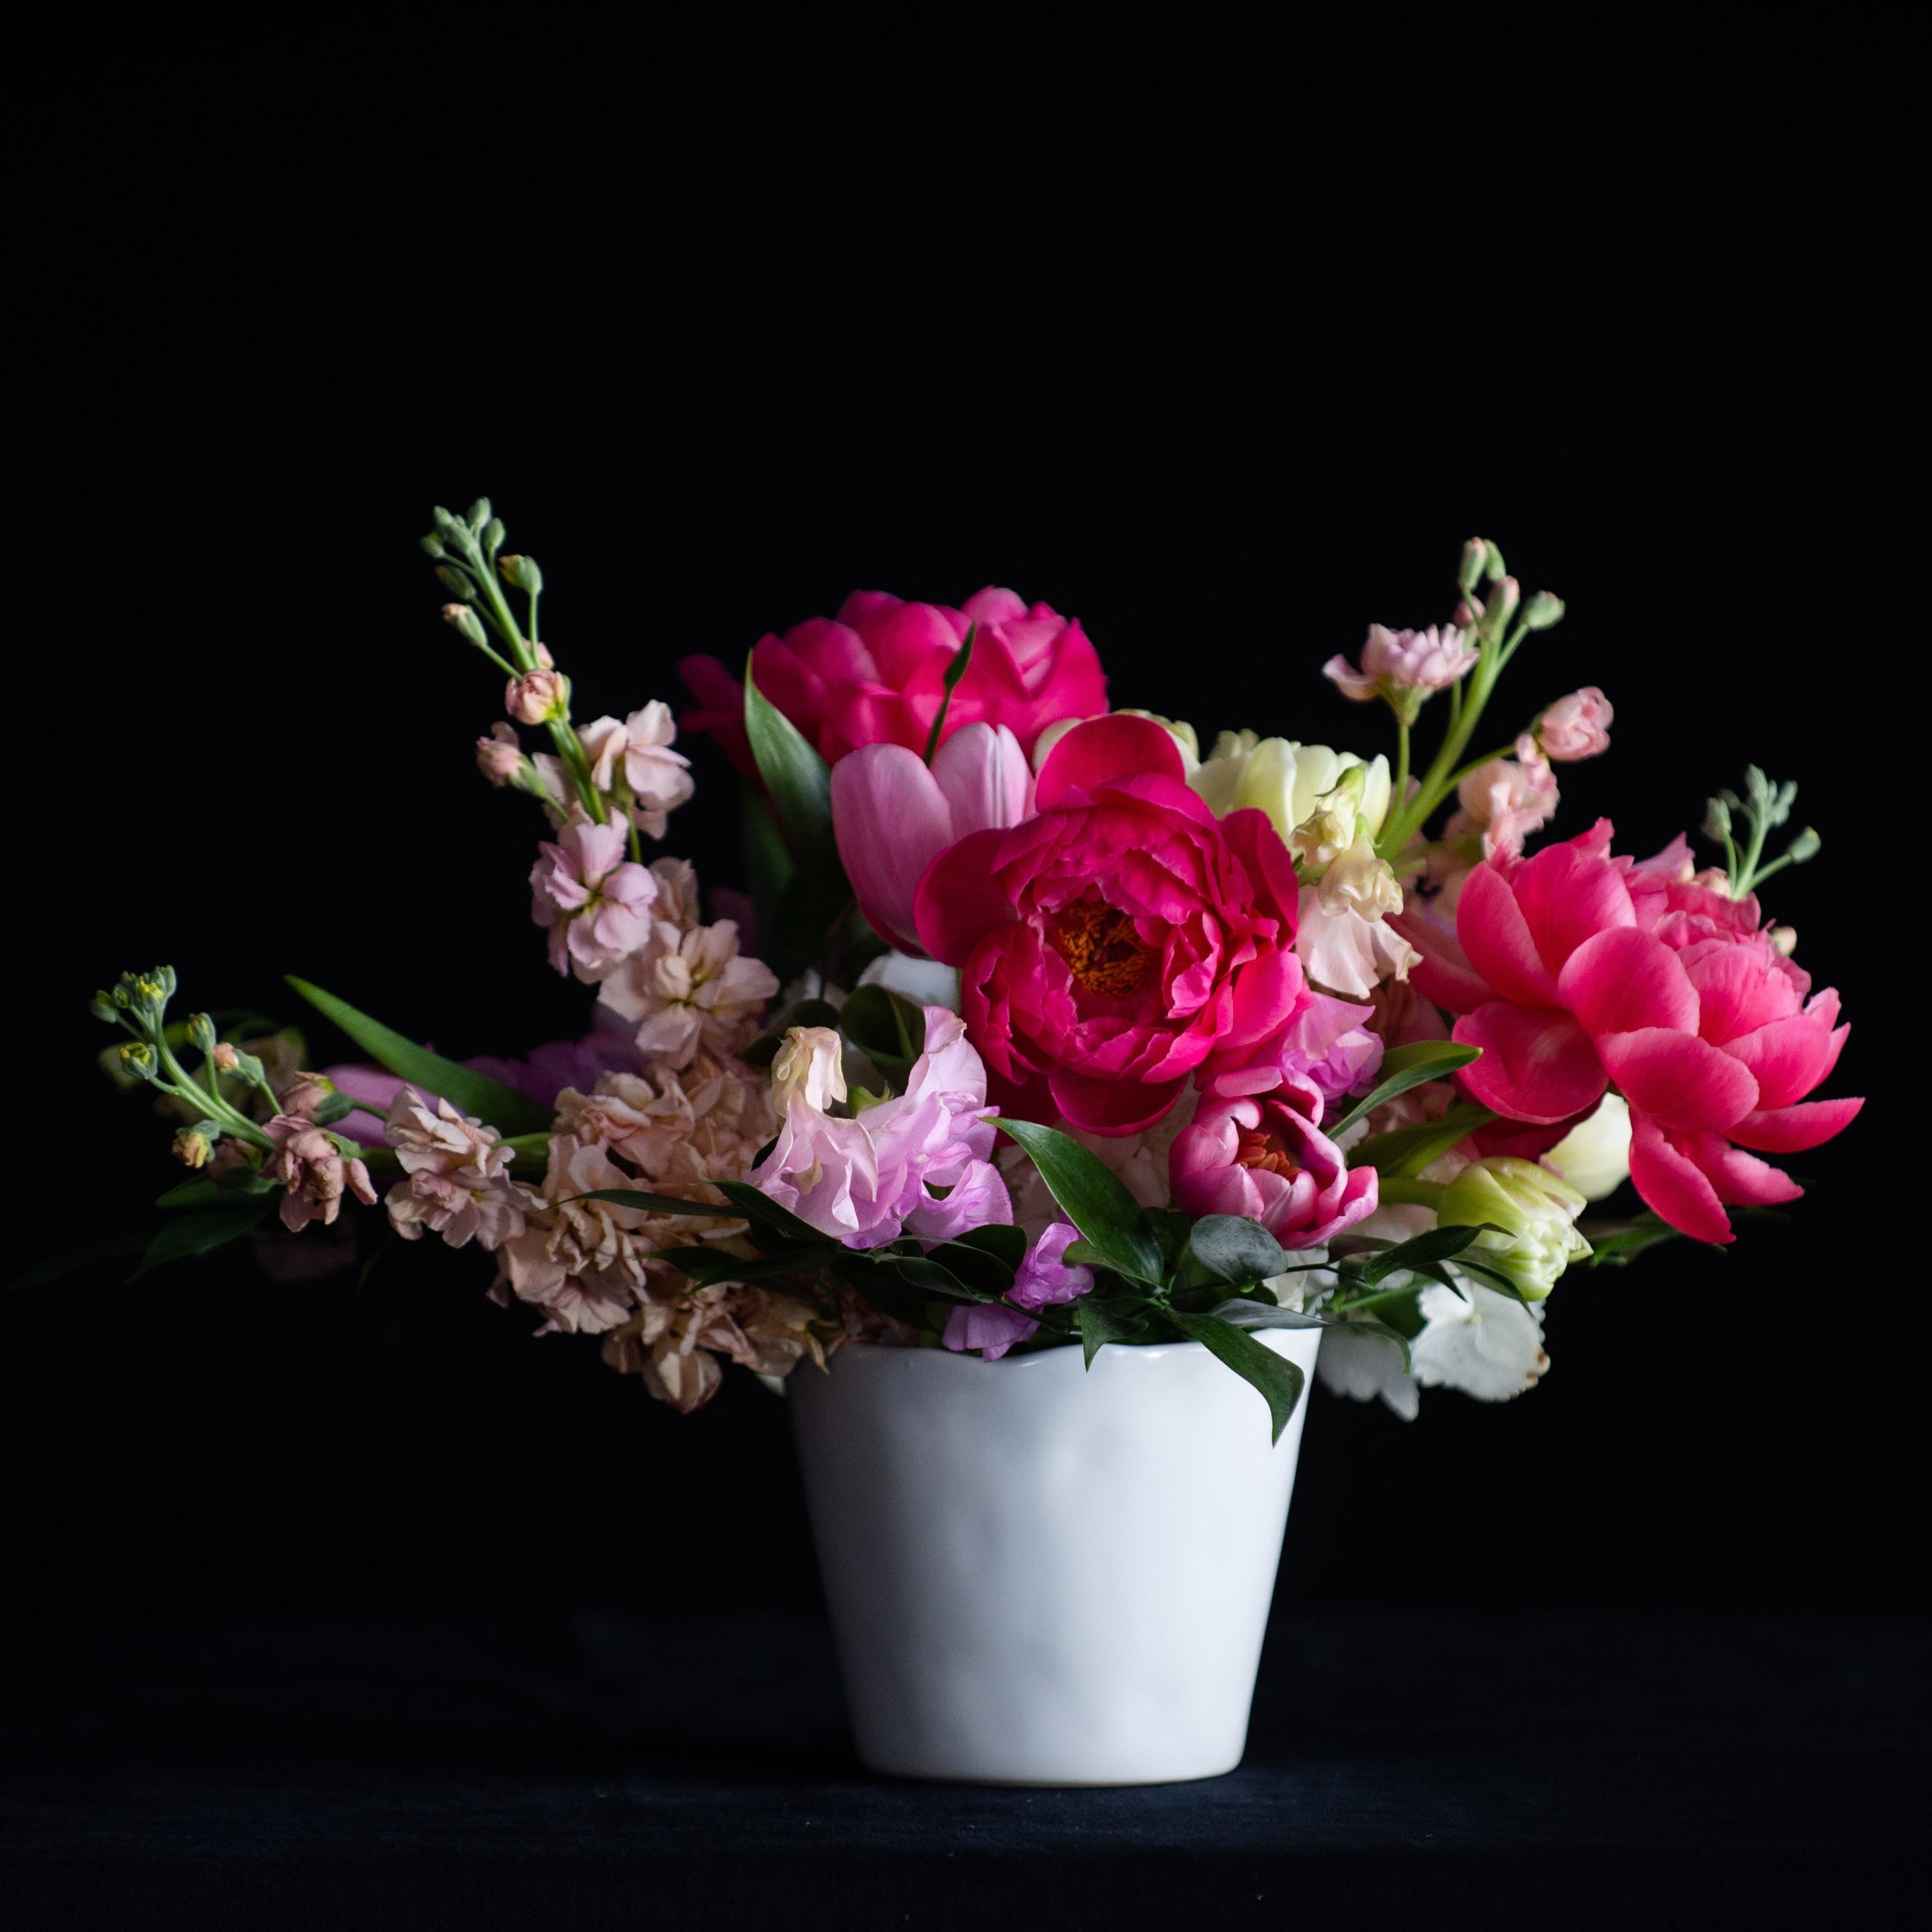 Peonies, tulips, hydrangea, and stock in pinks for Mothers Day 